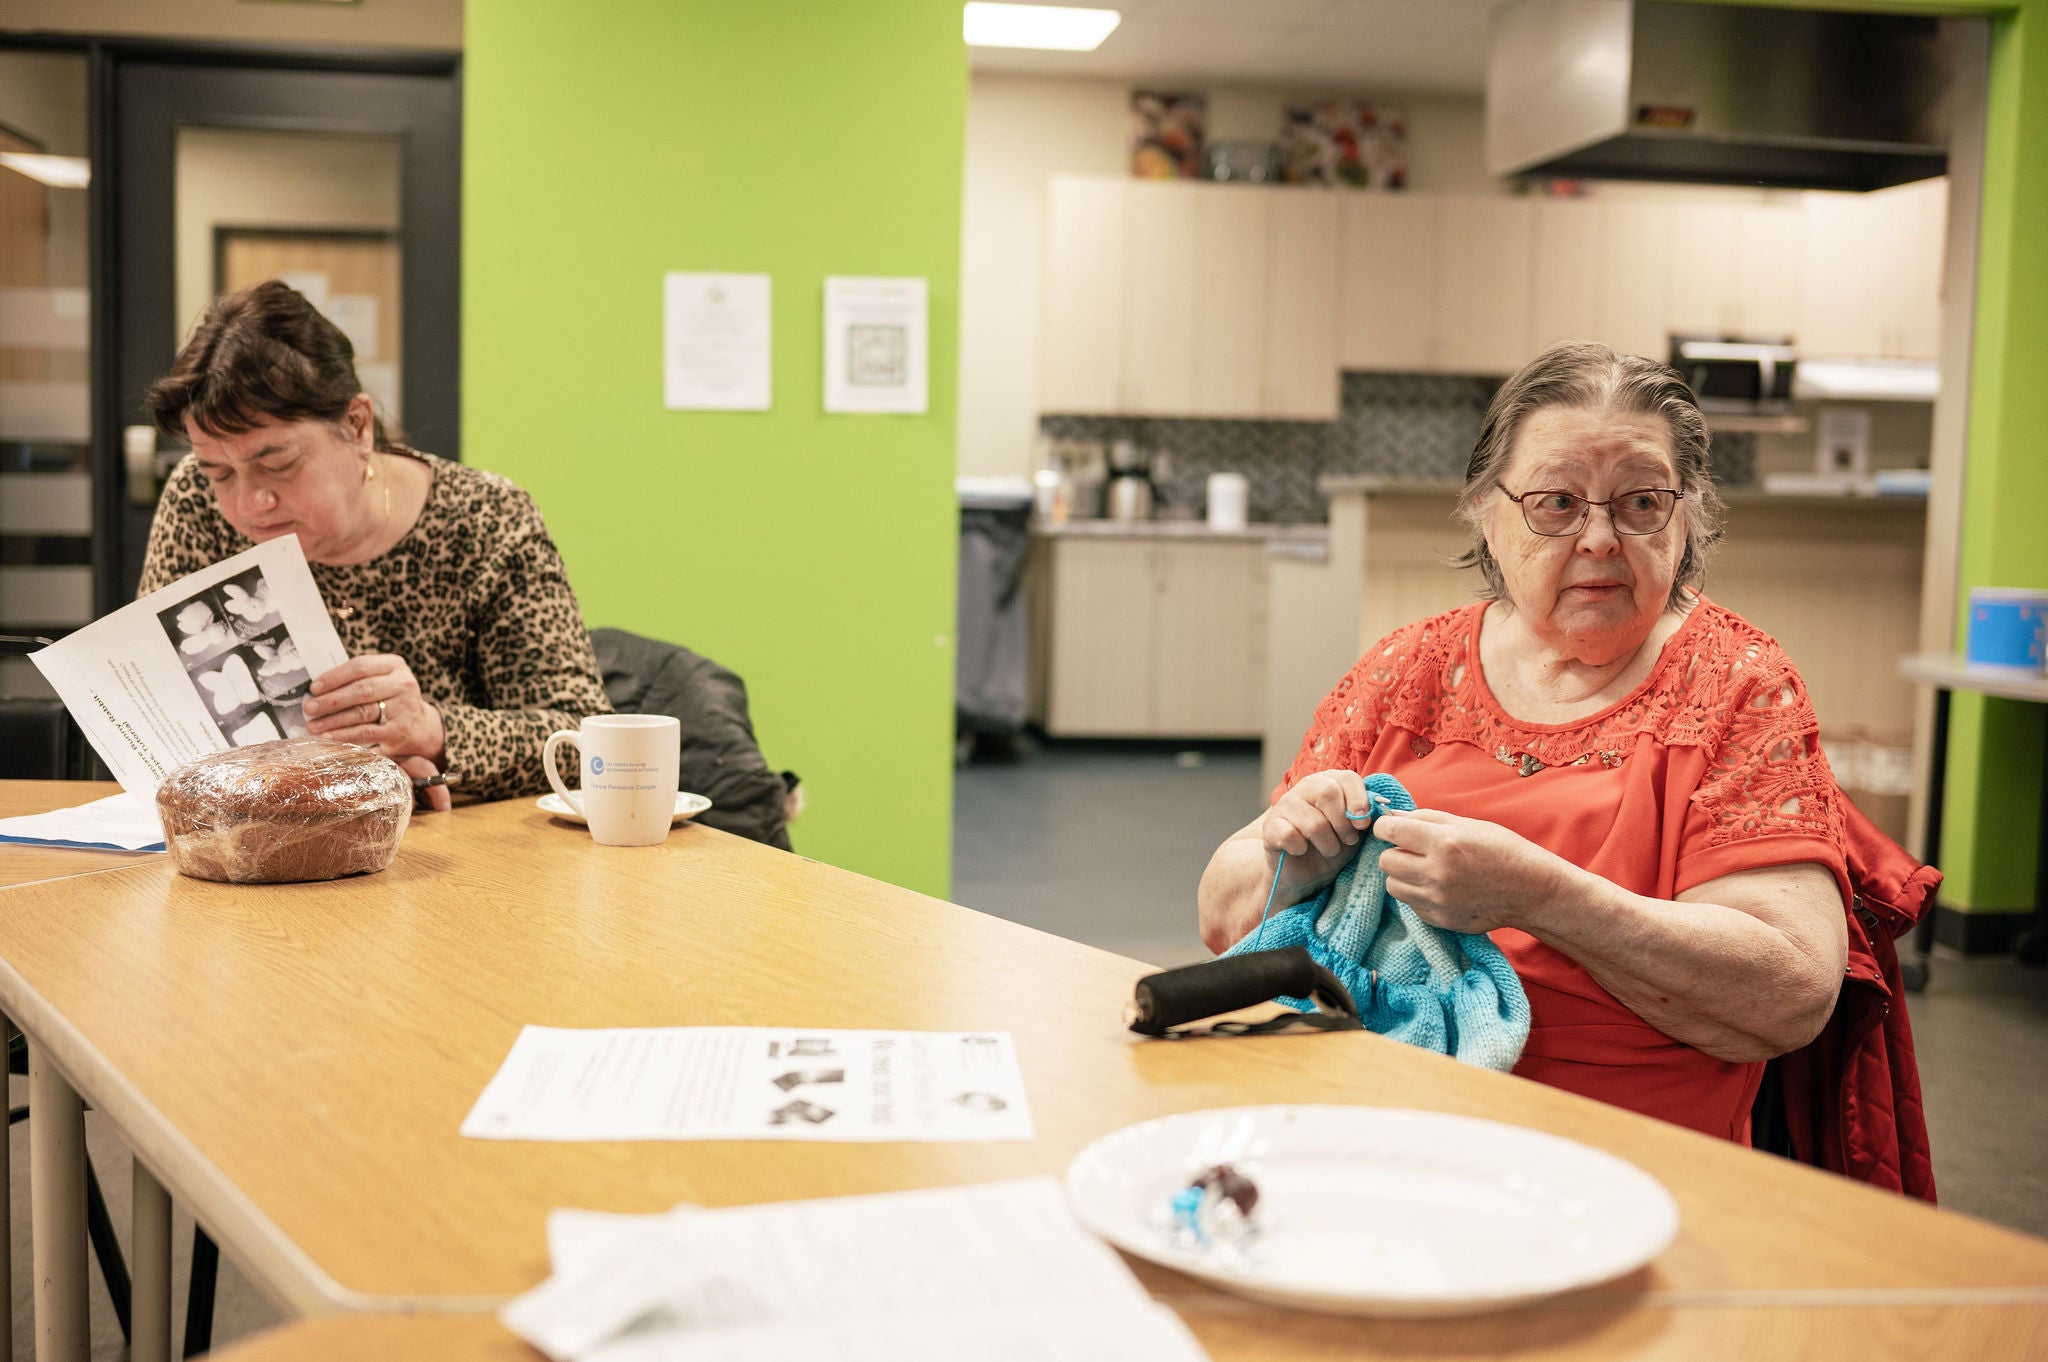 KCHC’s weekly Penguins group enjoying some crafting and togetherness. Photography by Liz Cooper Photography